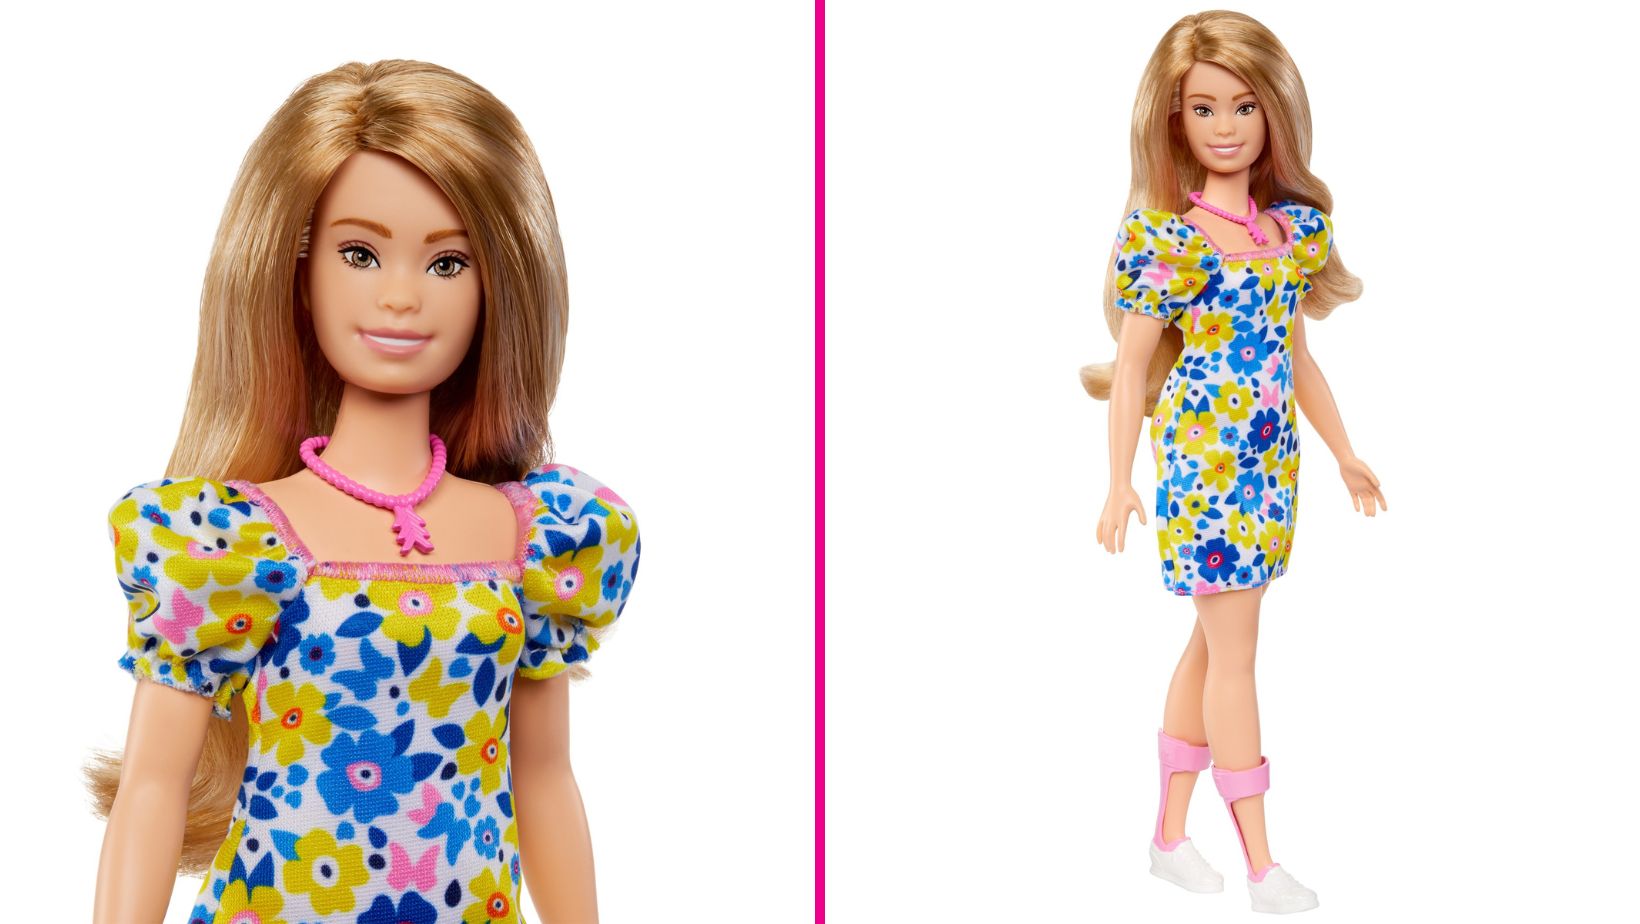 Representation Matters: Mattel Released a Barbie with Down Syndrome and She’s Everything 